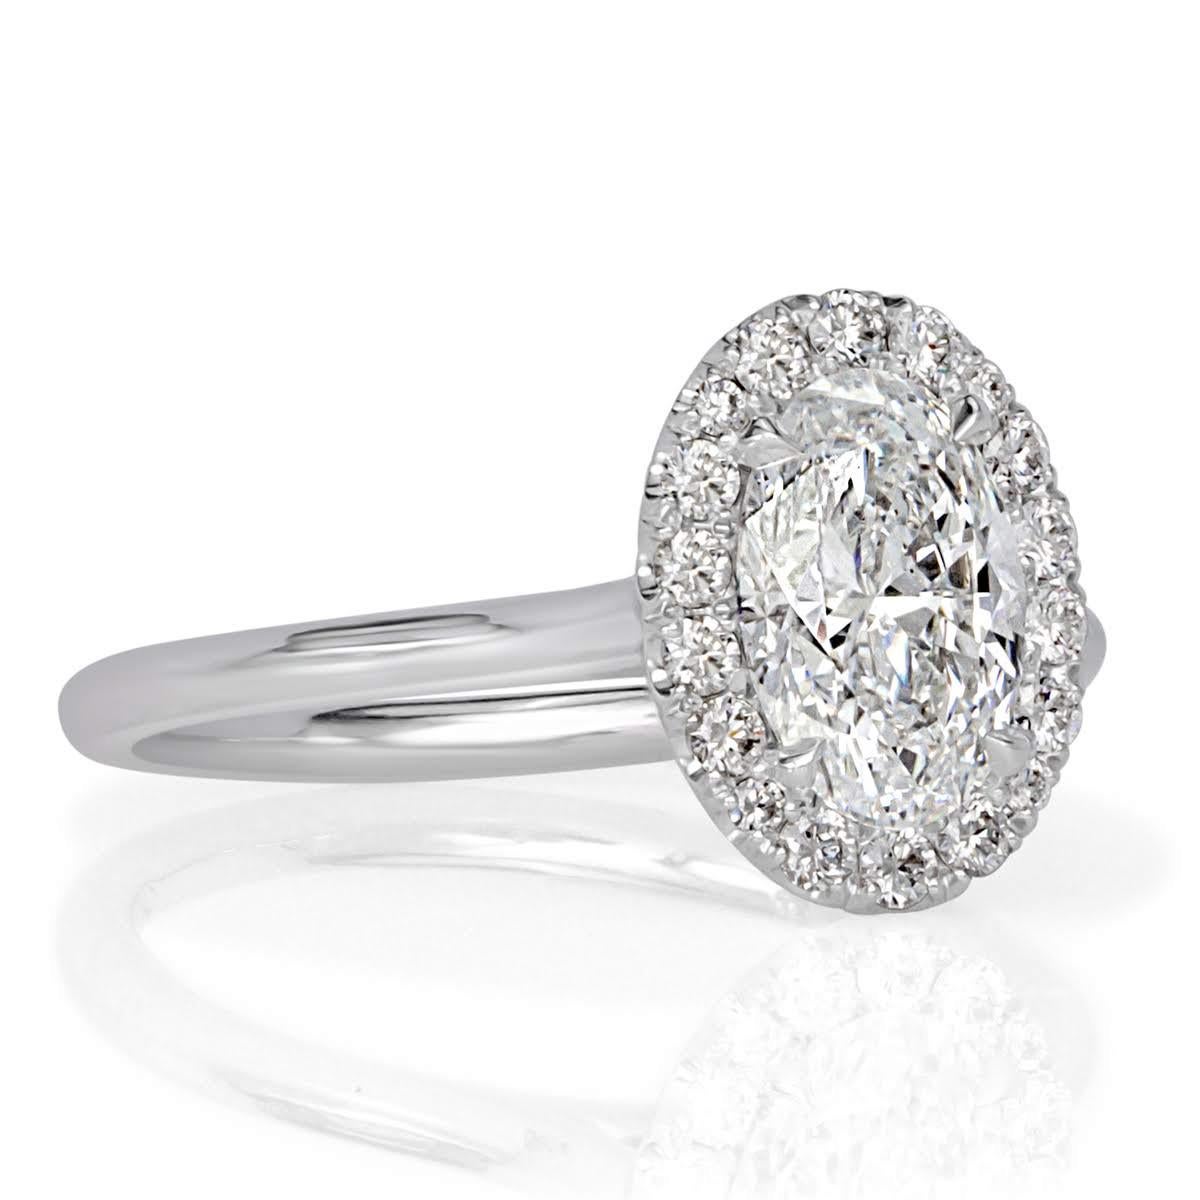 This beautiful diamond engagement ring showcases an exquisite 1.01ct oval cut center diamond, GIA certified at D-VS1. It is accented by a micro pavé halo and set atop a dainty platinum shank. The accent diamonds total 0.23ct in weight and are graded